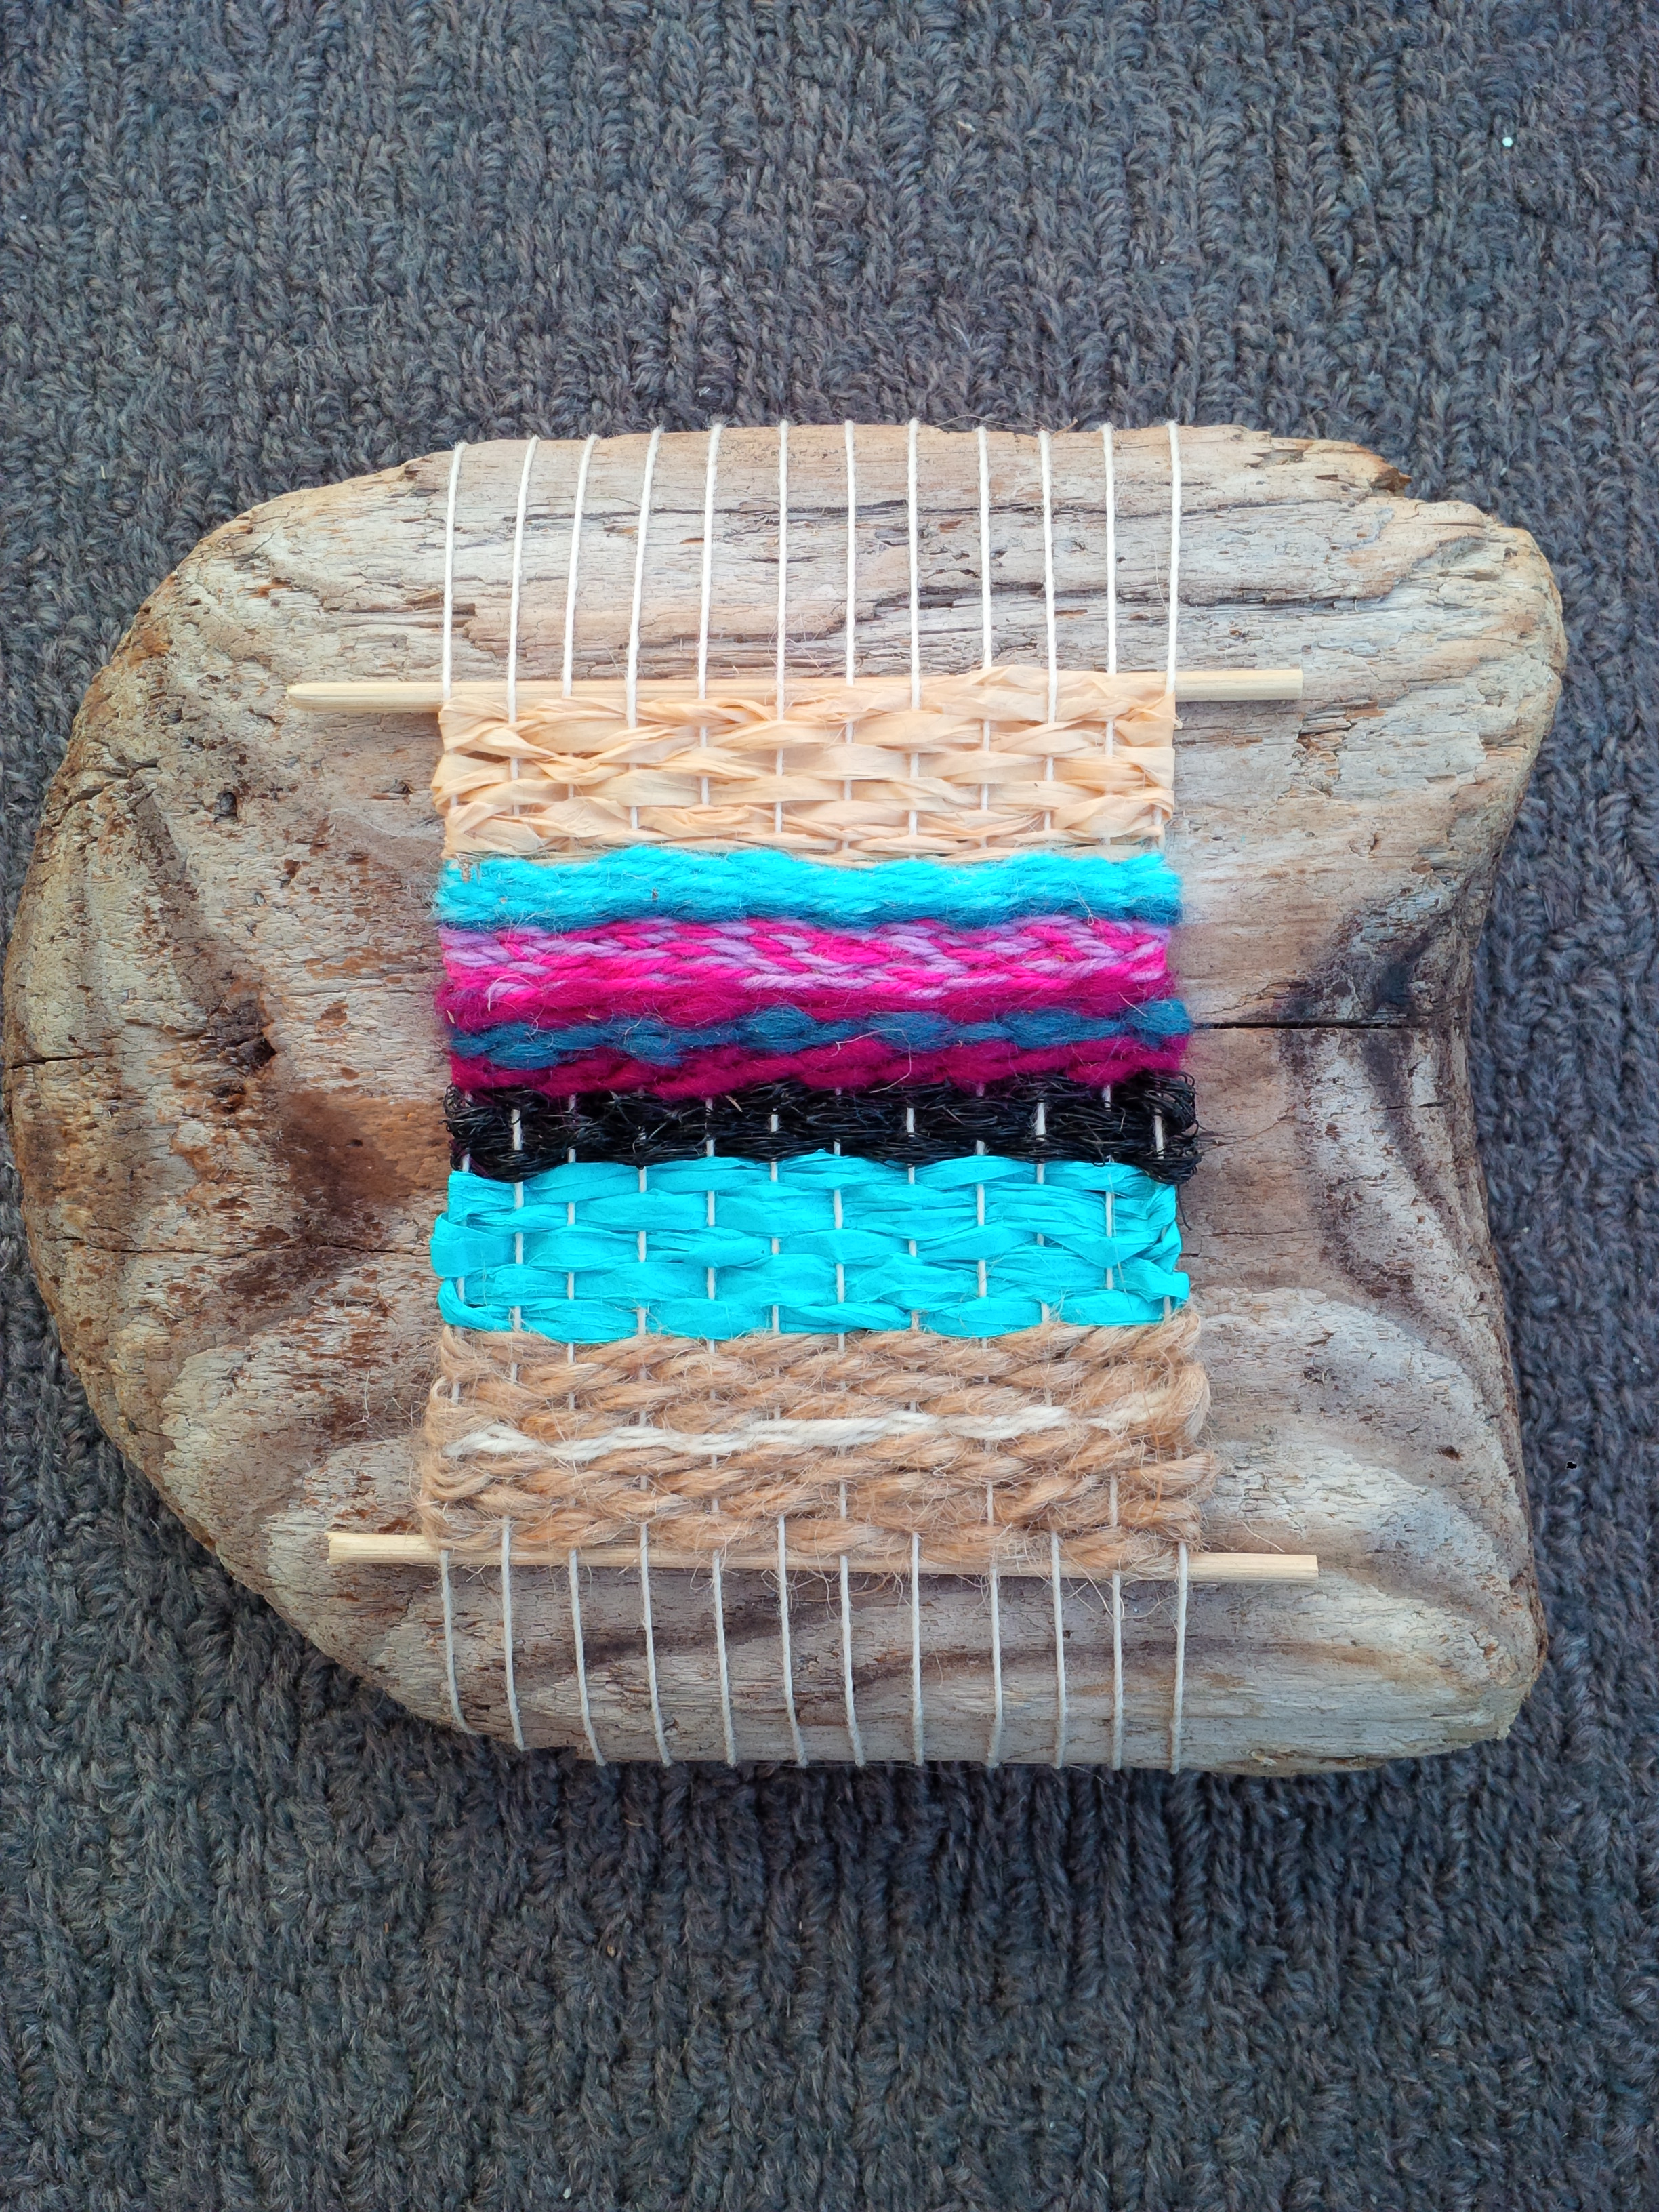 A chunk of silvery weathered driftwood, with a warp of threads and weaving onto the warp in raffia and yarns, in turquoise, pinks, beige and black